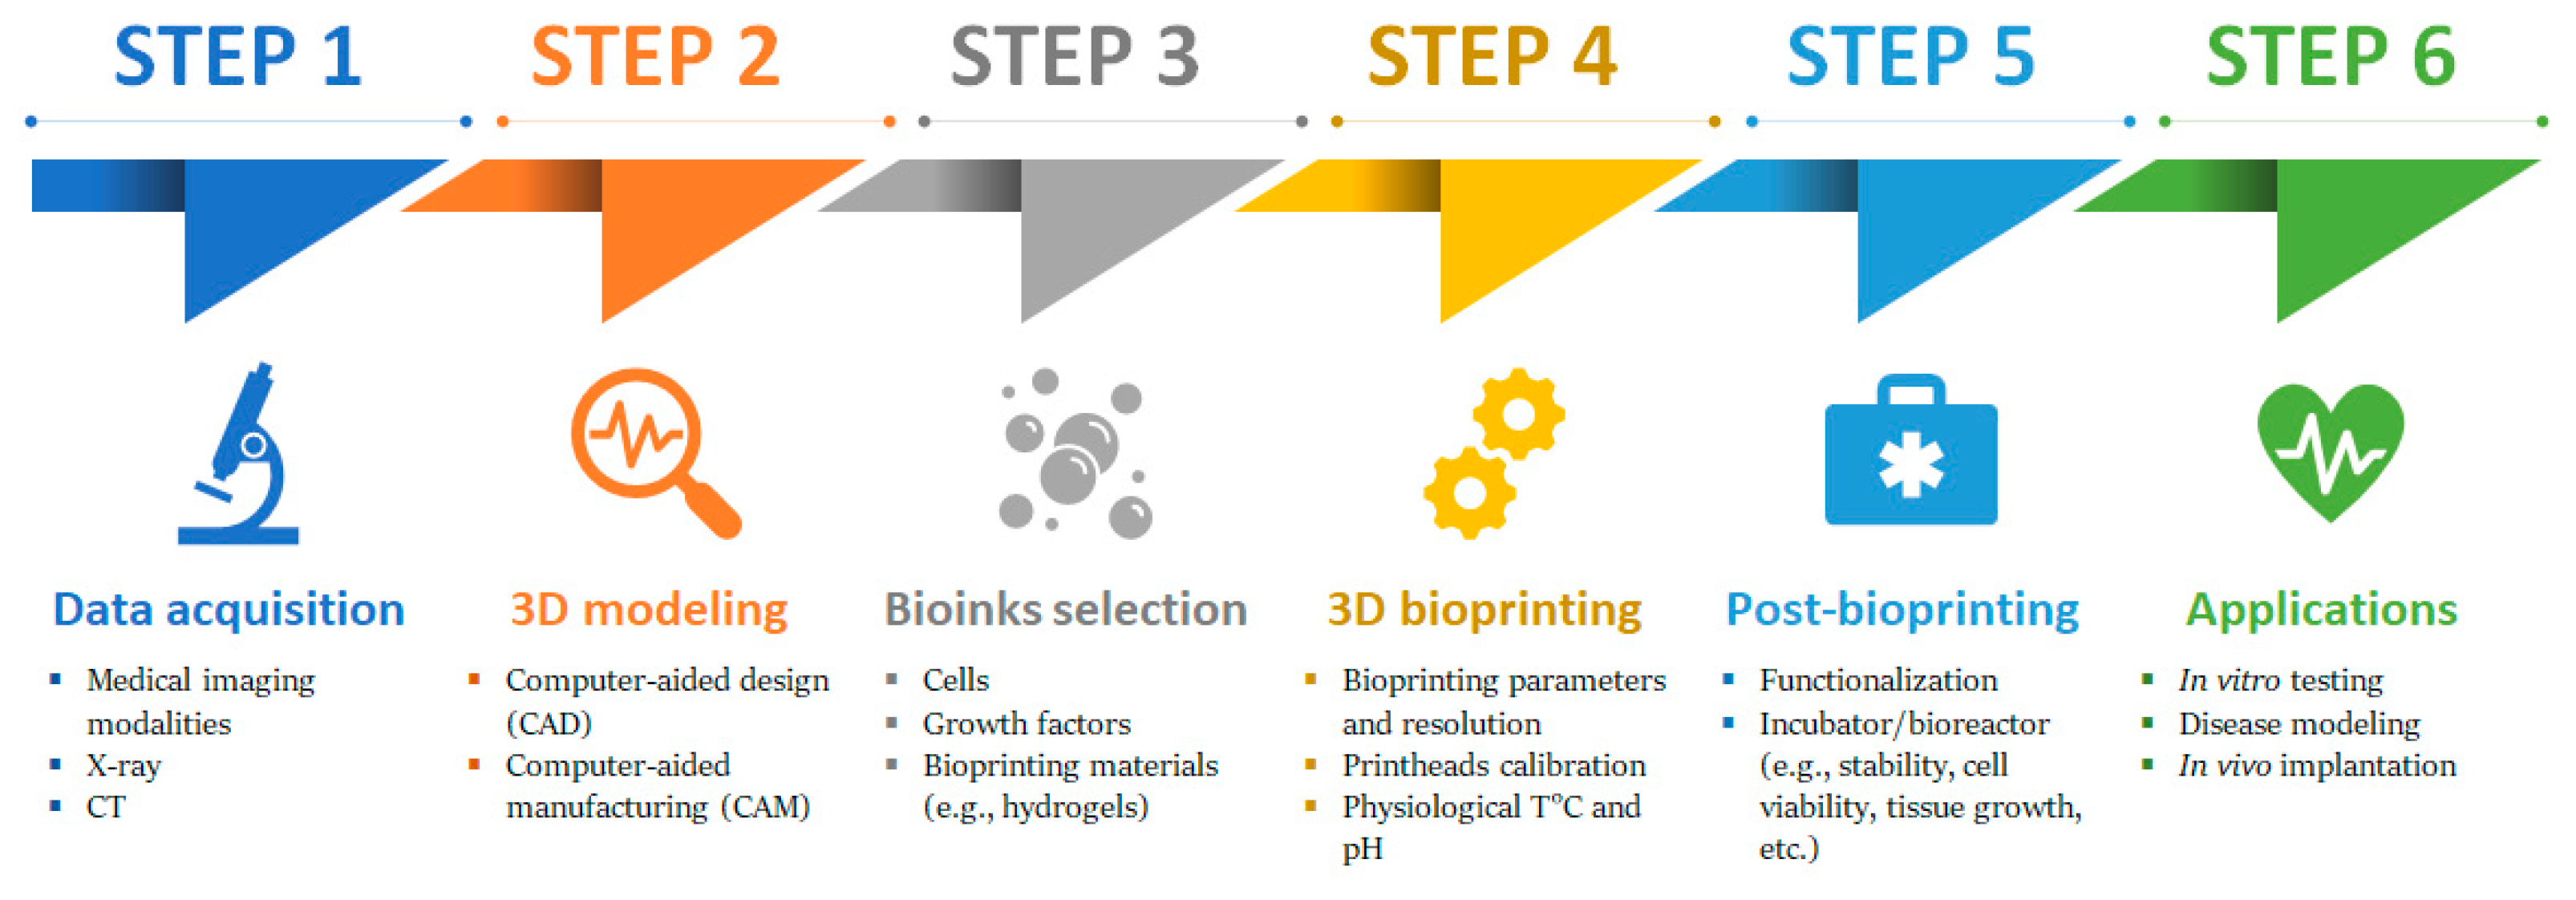 Recombinant Spider Silk Bioinks for Continuous Protein Release by